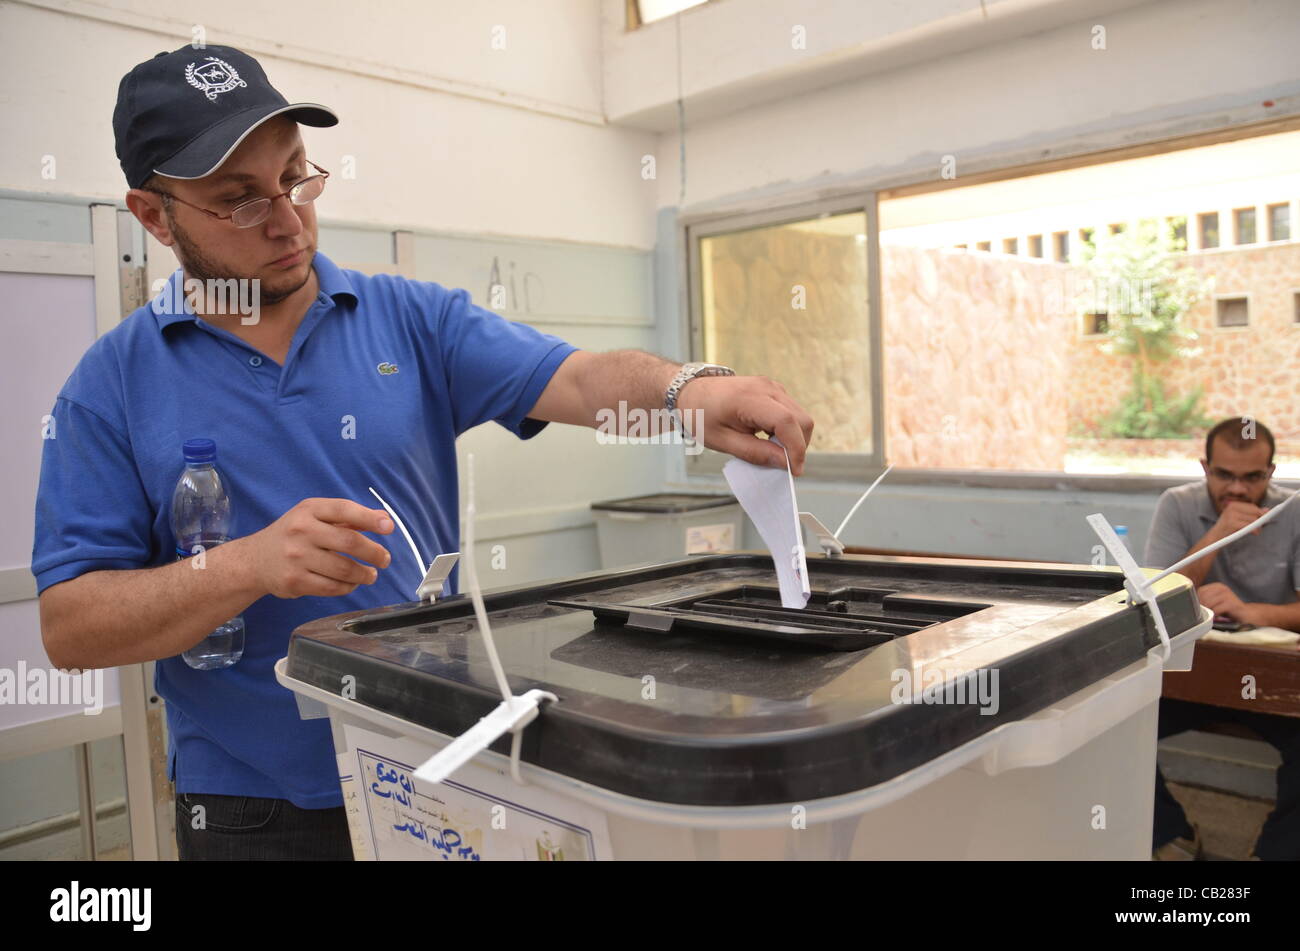 Voting underway May 2012 in Egypt's first Presidential poll since the overthrow of autocratic ruler Hosni Mubarak in Feb 2011. Stock Photo